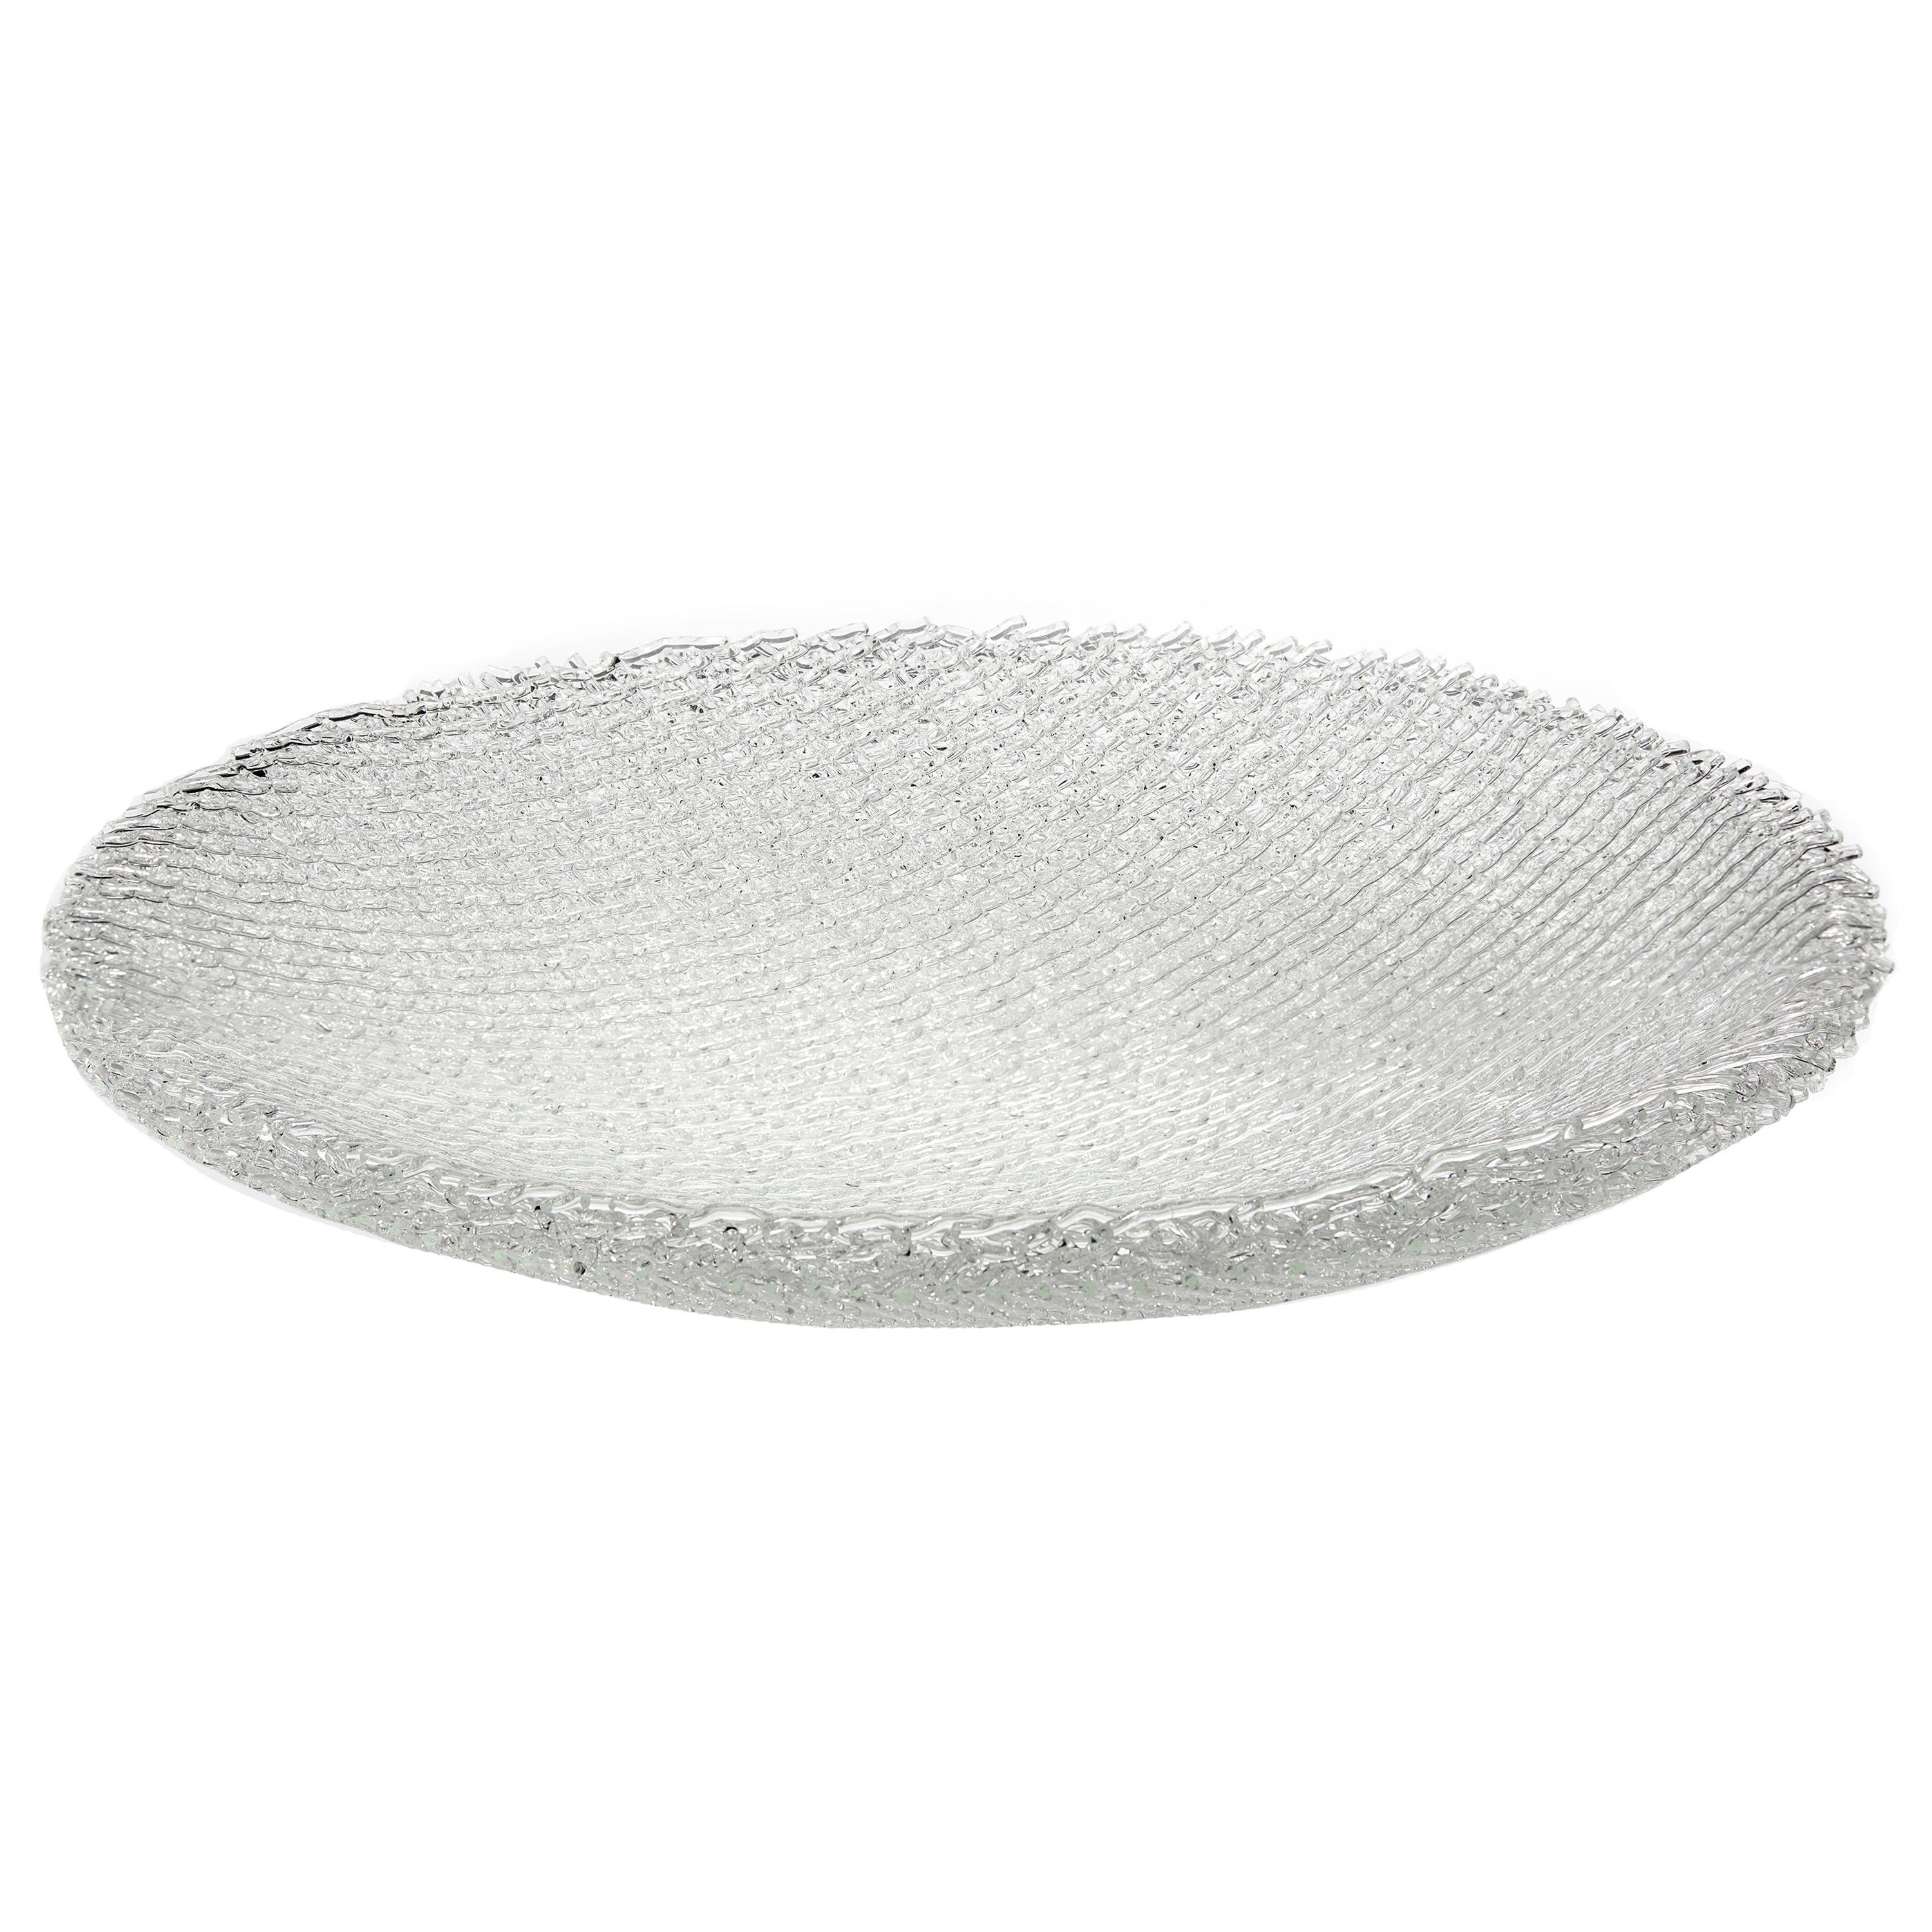 Soft Rime, a Unique Woven Clear Glass Sculptural Centrepiece by Cathryn Shilling